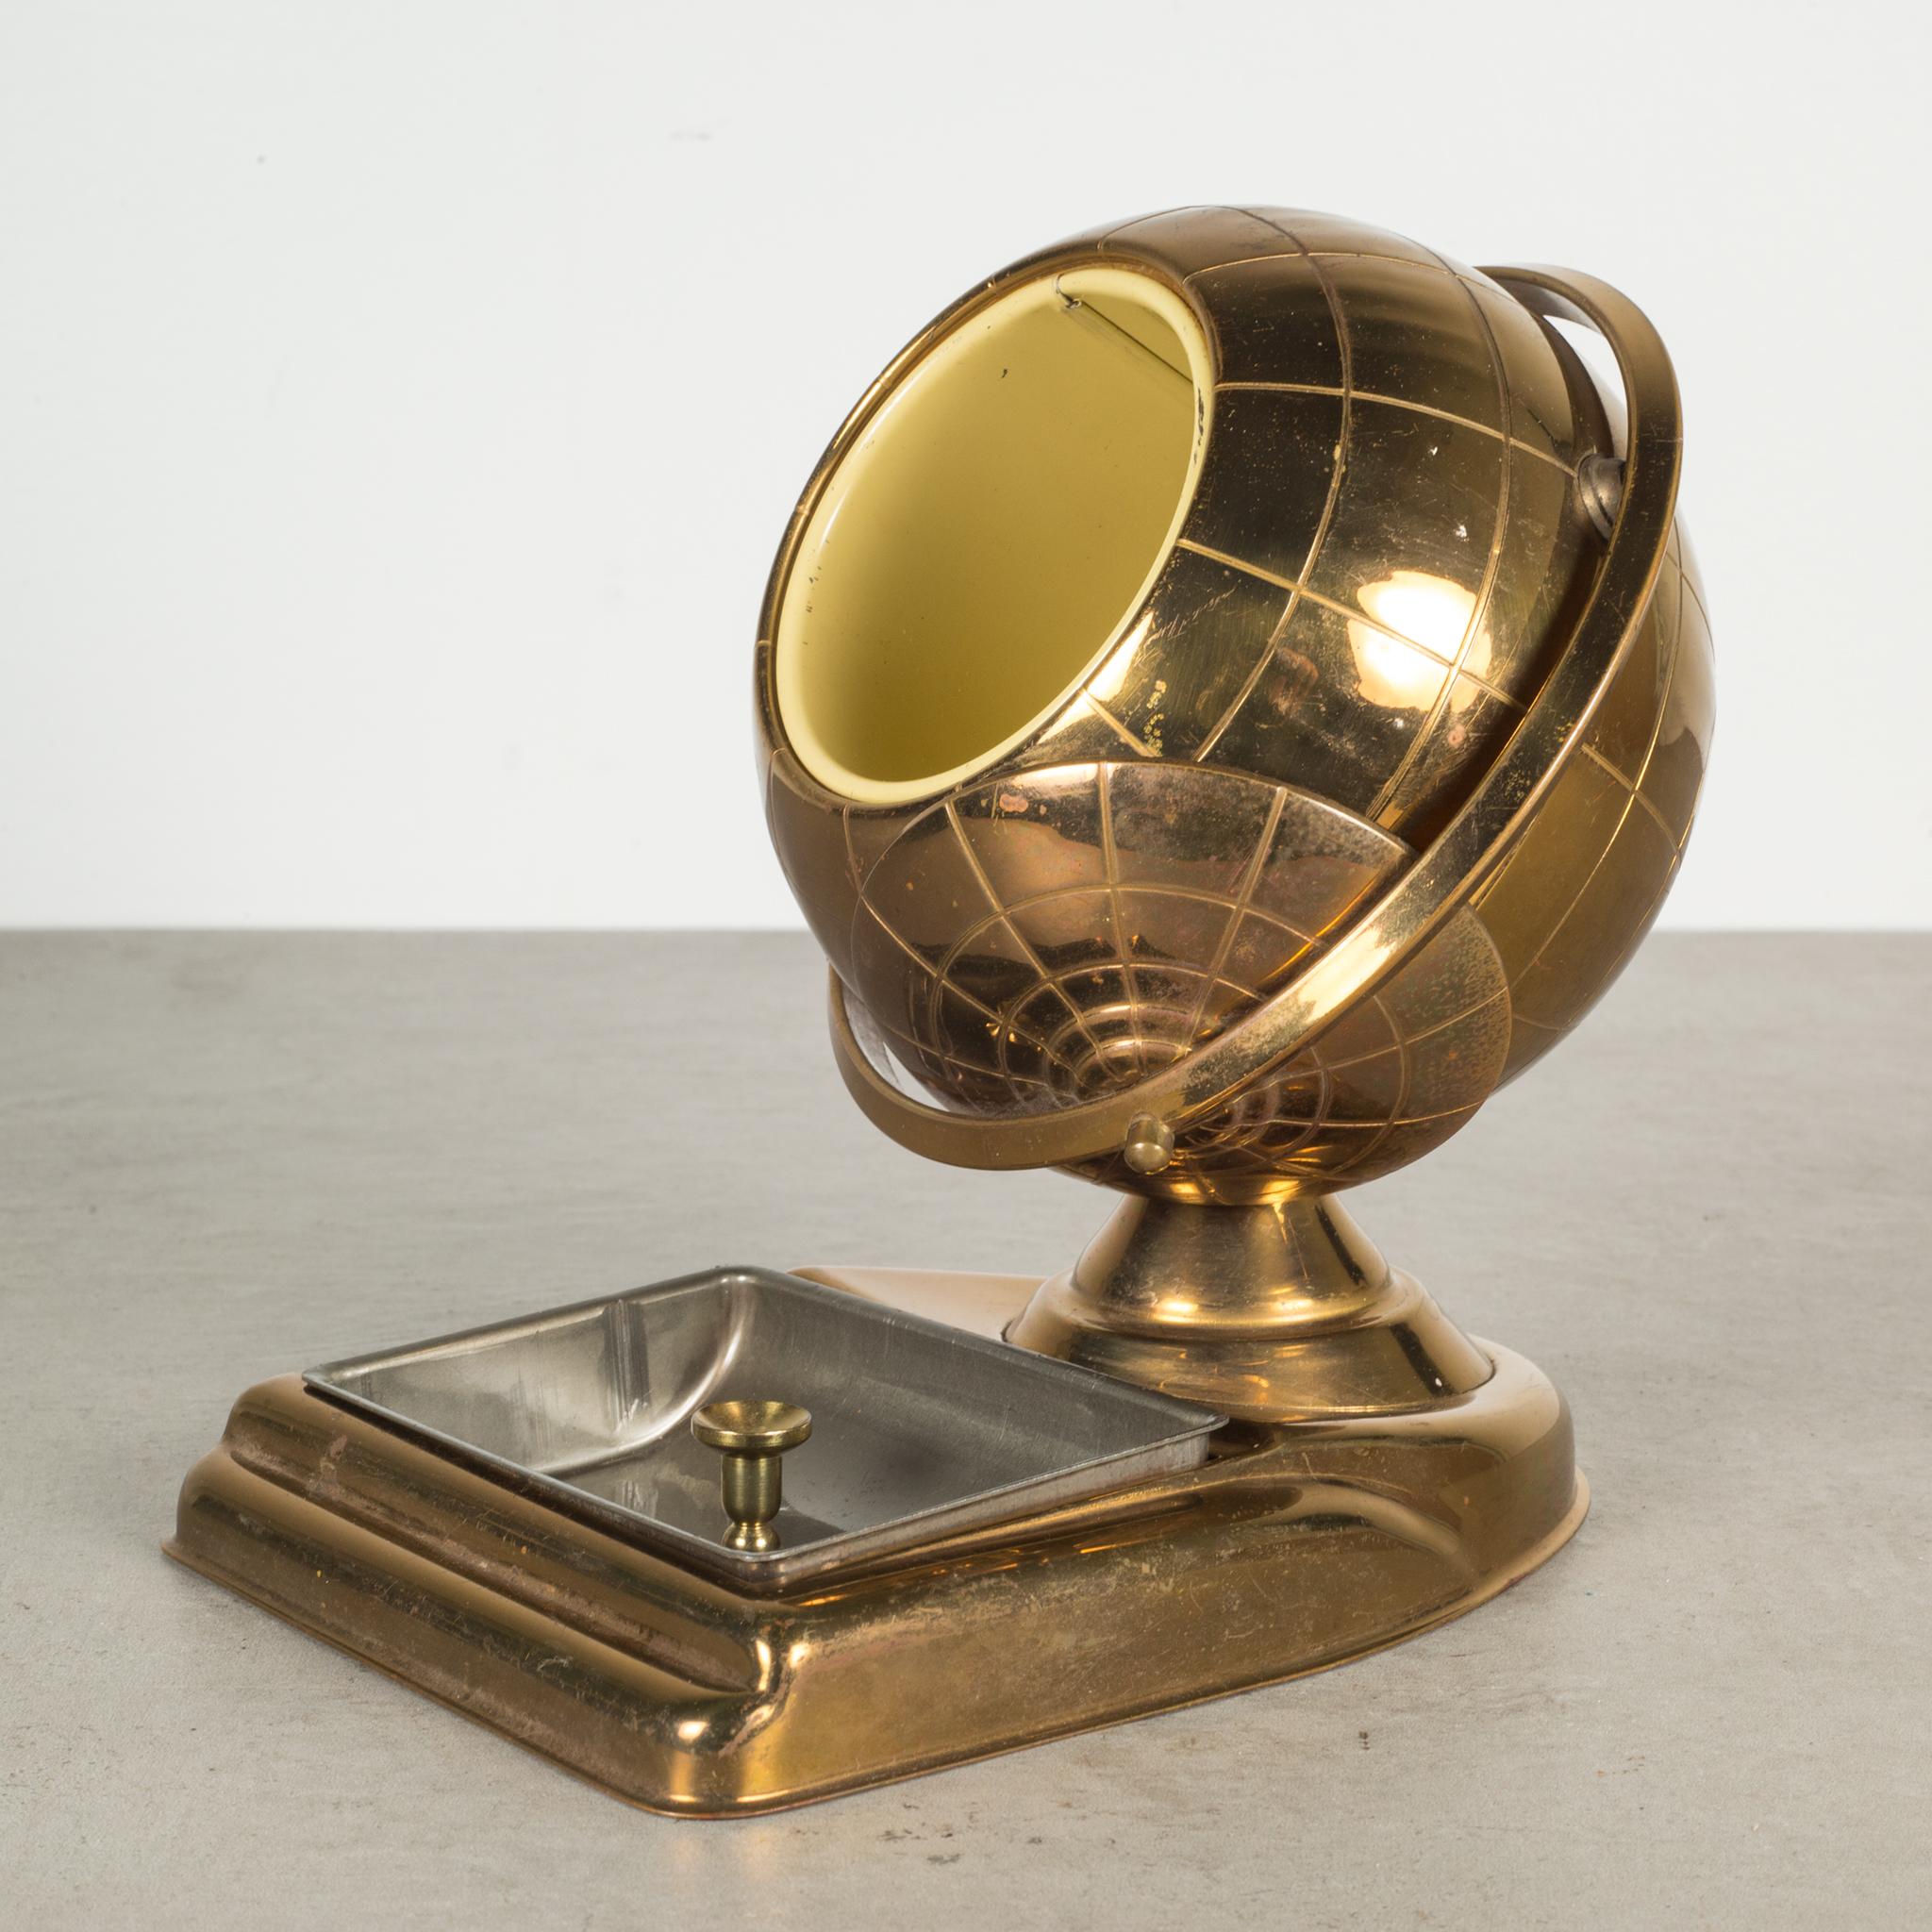 About

An original mid-century brass cigarette holder and ashtray or coin dish. The lid slides open on the globe's axis to reveal a metal interior designed to hold cigarettes. This globe is unique because it has an attached tray.

Creator: